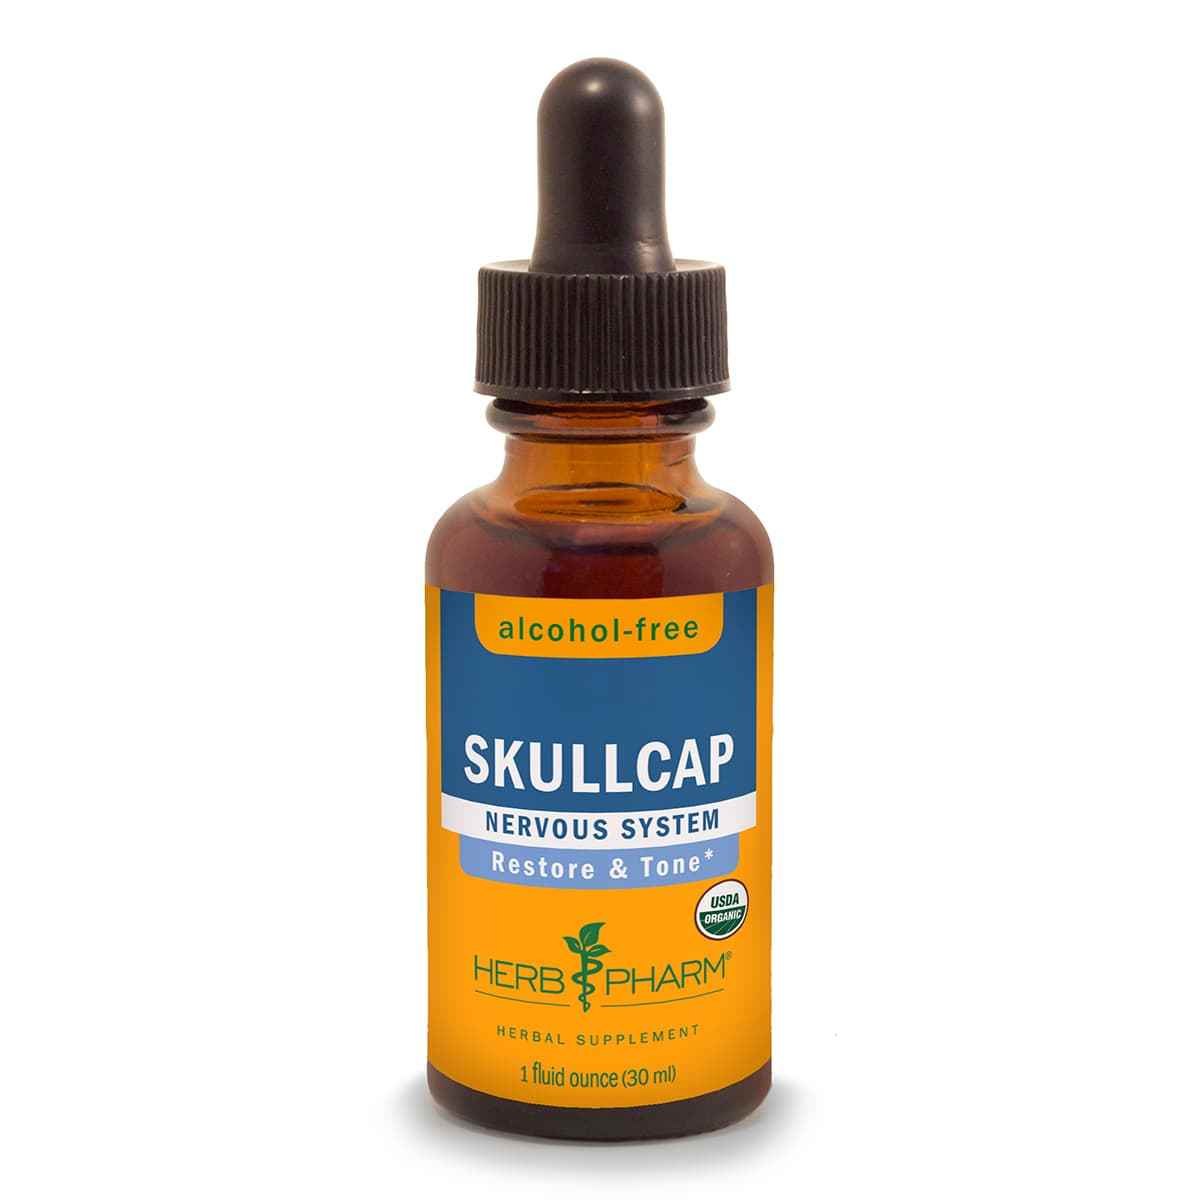 Primary image of Skullcap Extract Alcohol Free